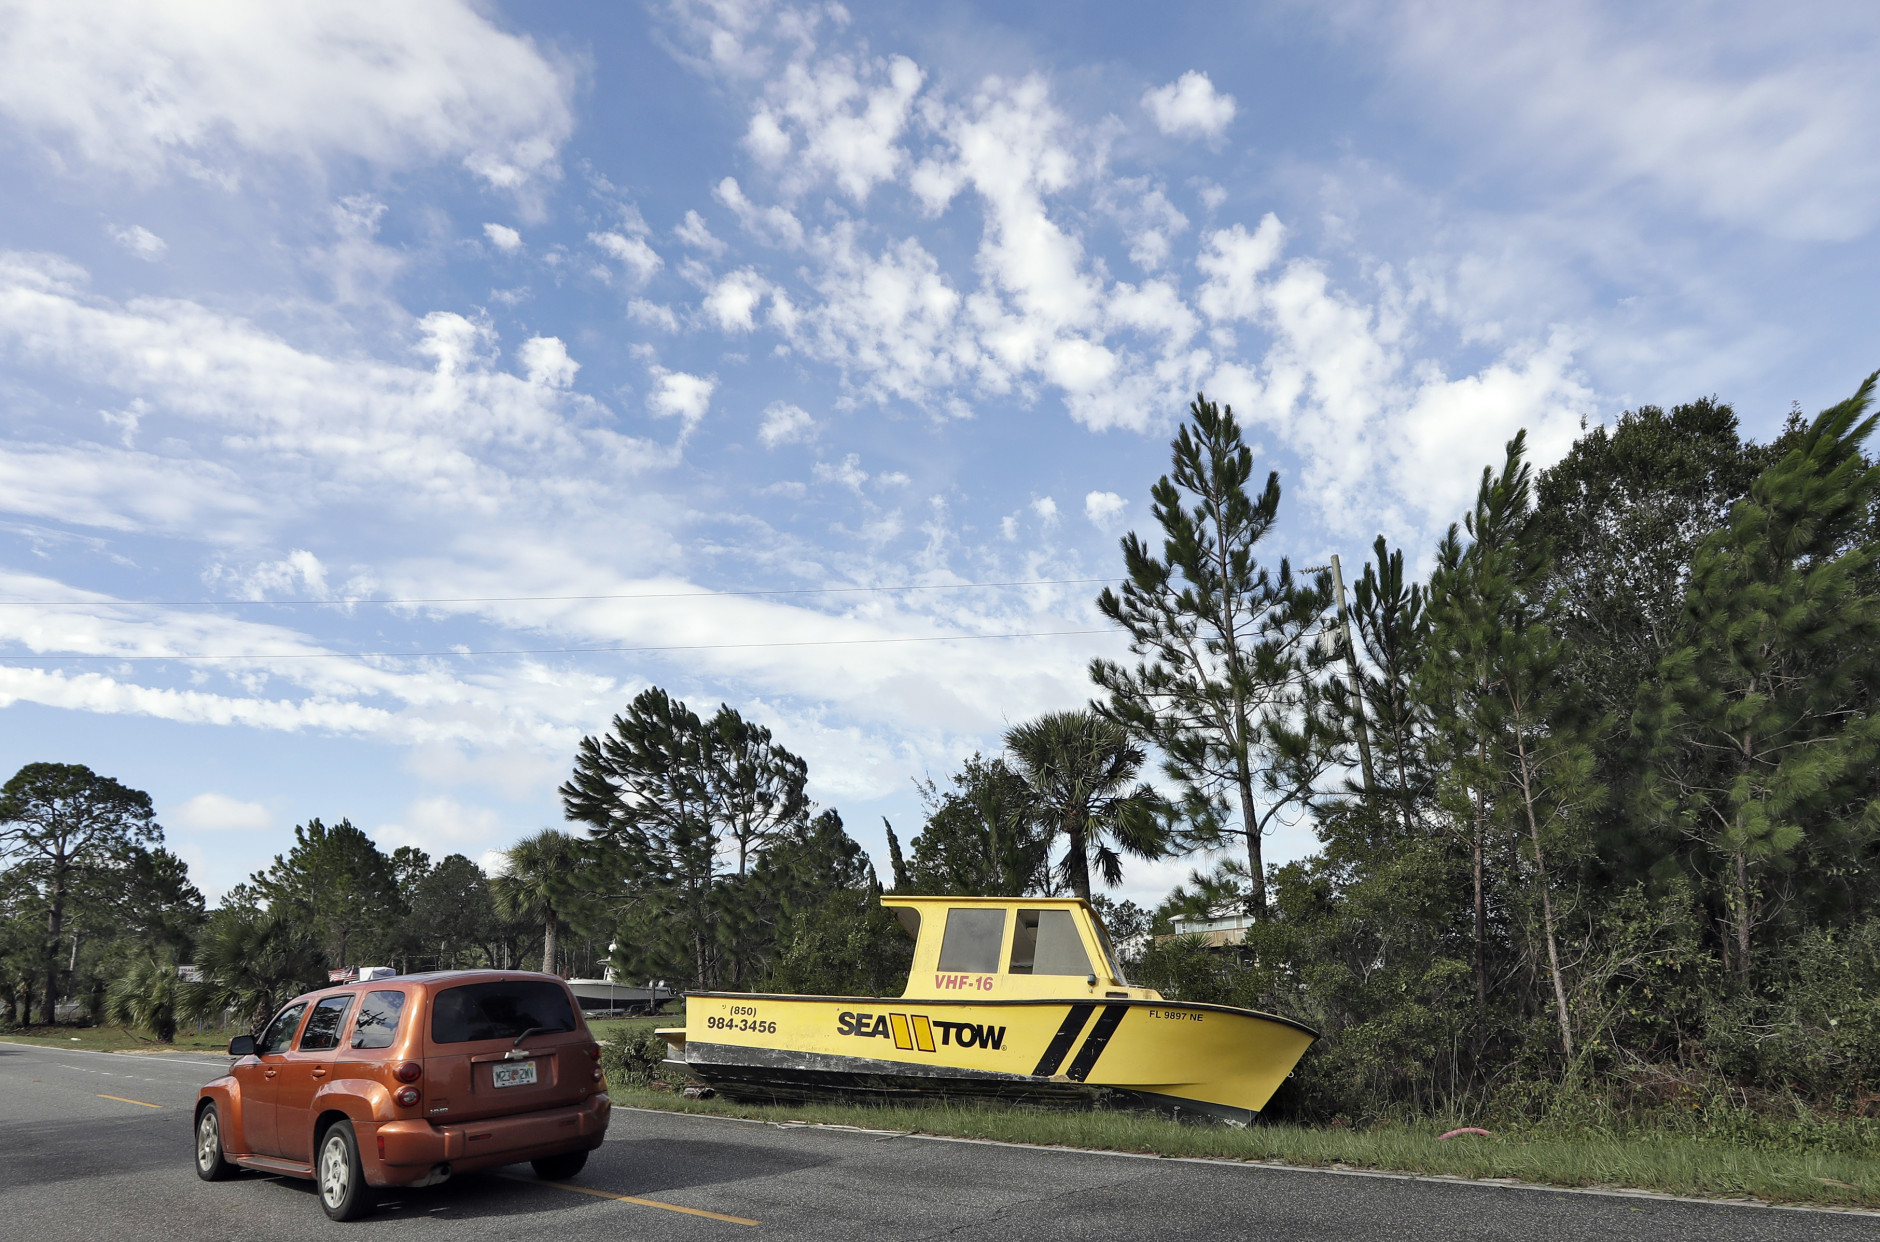 Motorists drive by a boat that was tossed onto the road when winds from Hurricane Hermine came ashore early Friday, Sept. 2, 2016, in Dekle Beach, Fla.  Hermine was downgraded to a tropical storm after it made landfall, as it moves over Georgia, but the U.S. National Hurricane Center says winds are increasing along the Southeast coast and flooding rains continue. (AP Photo/Chris O'Meara)